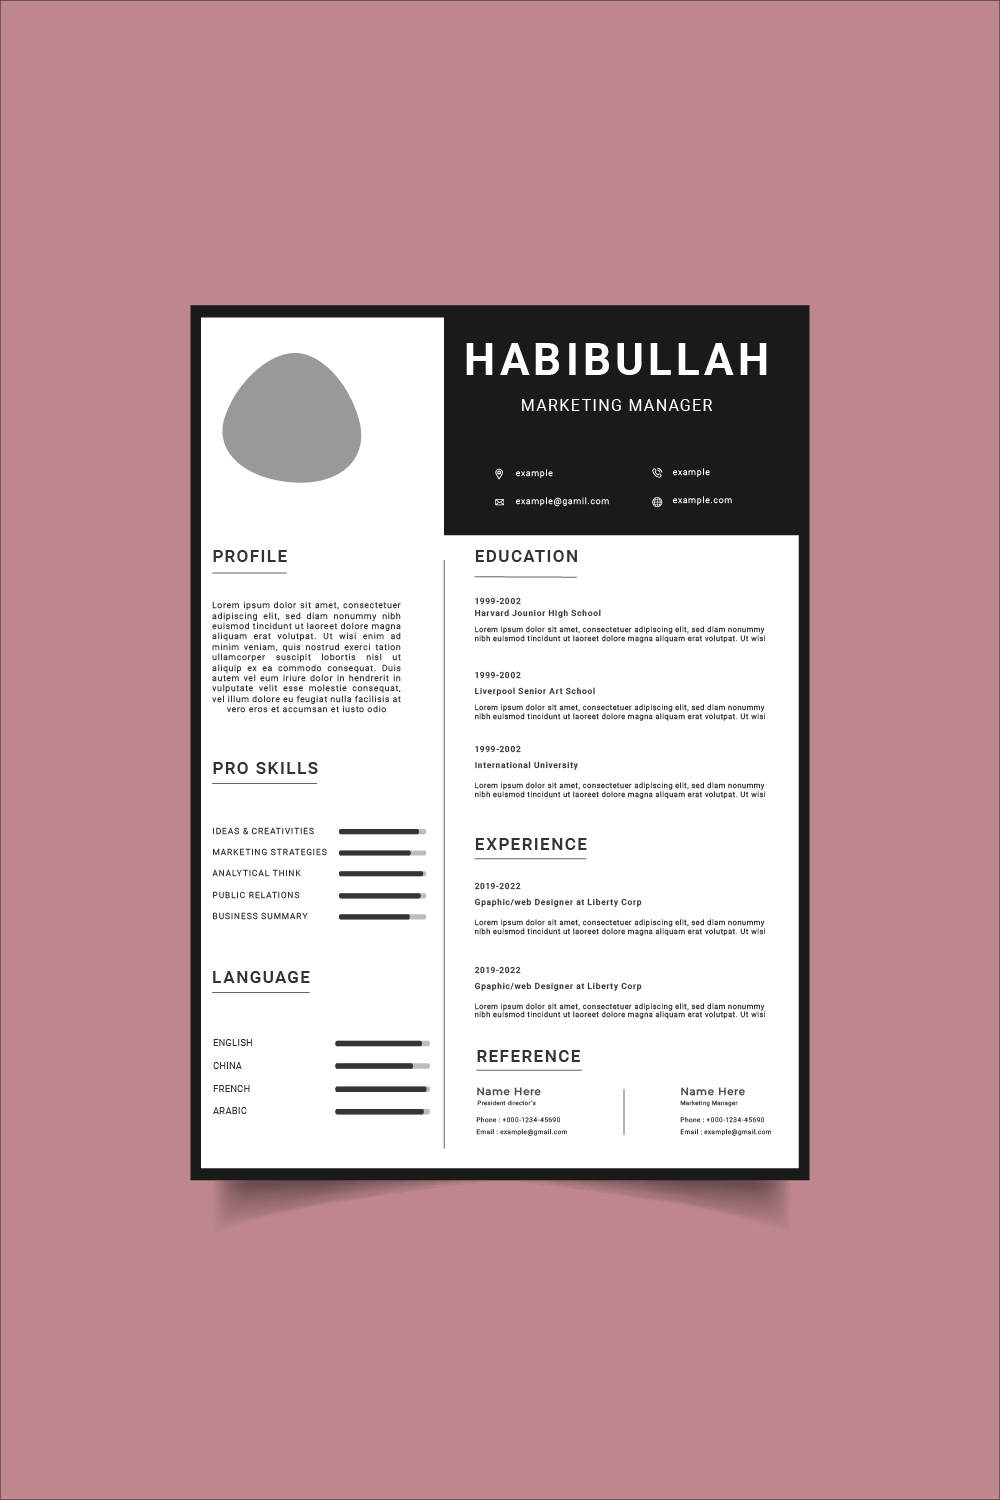 Black and white resume template on a pink background.